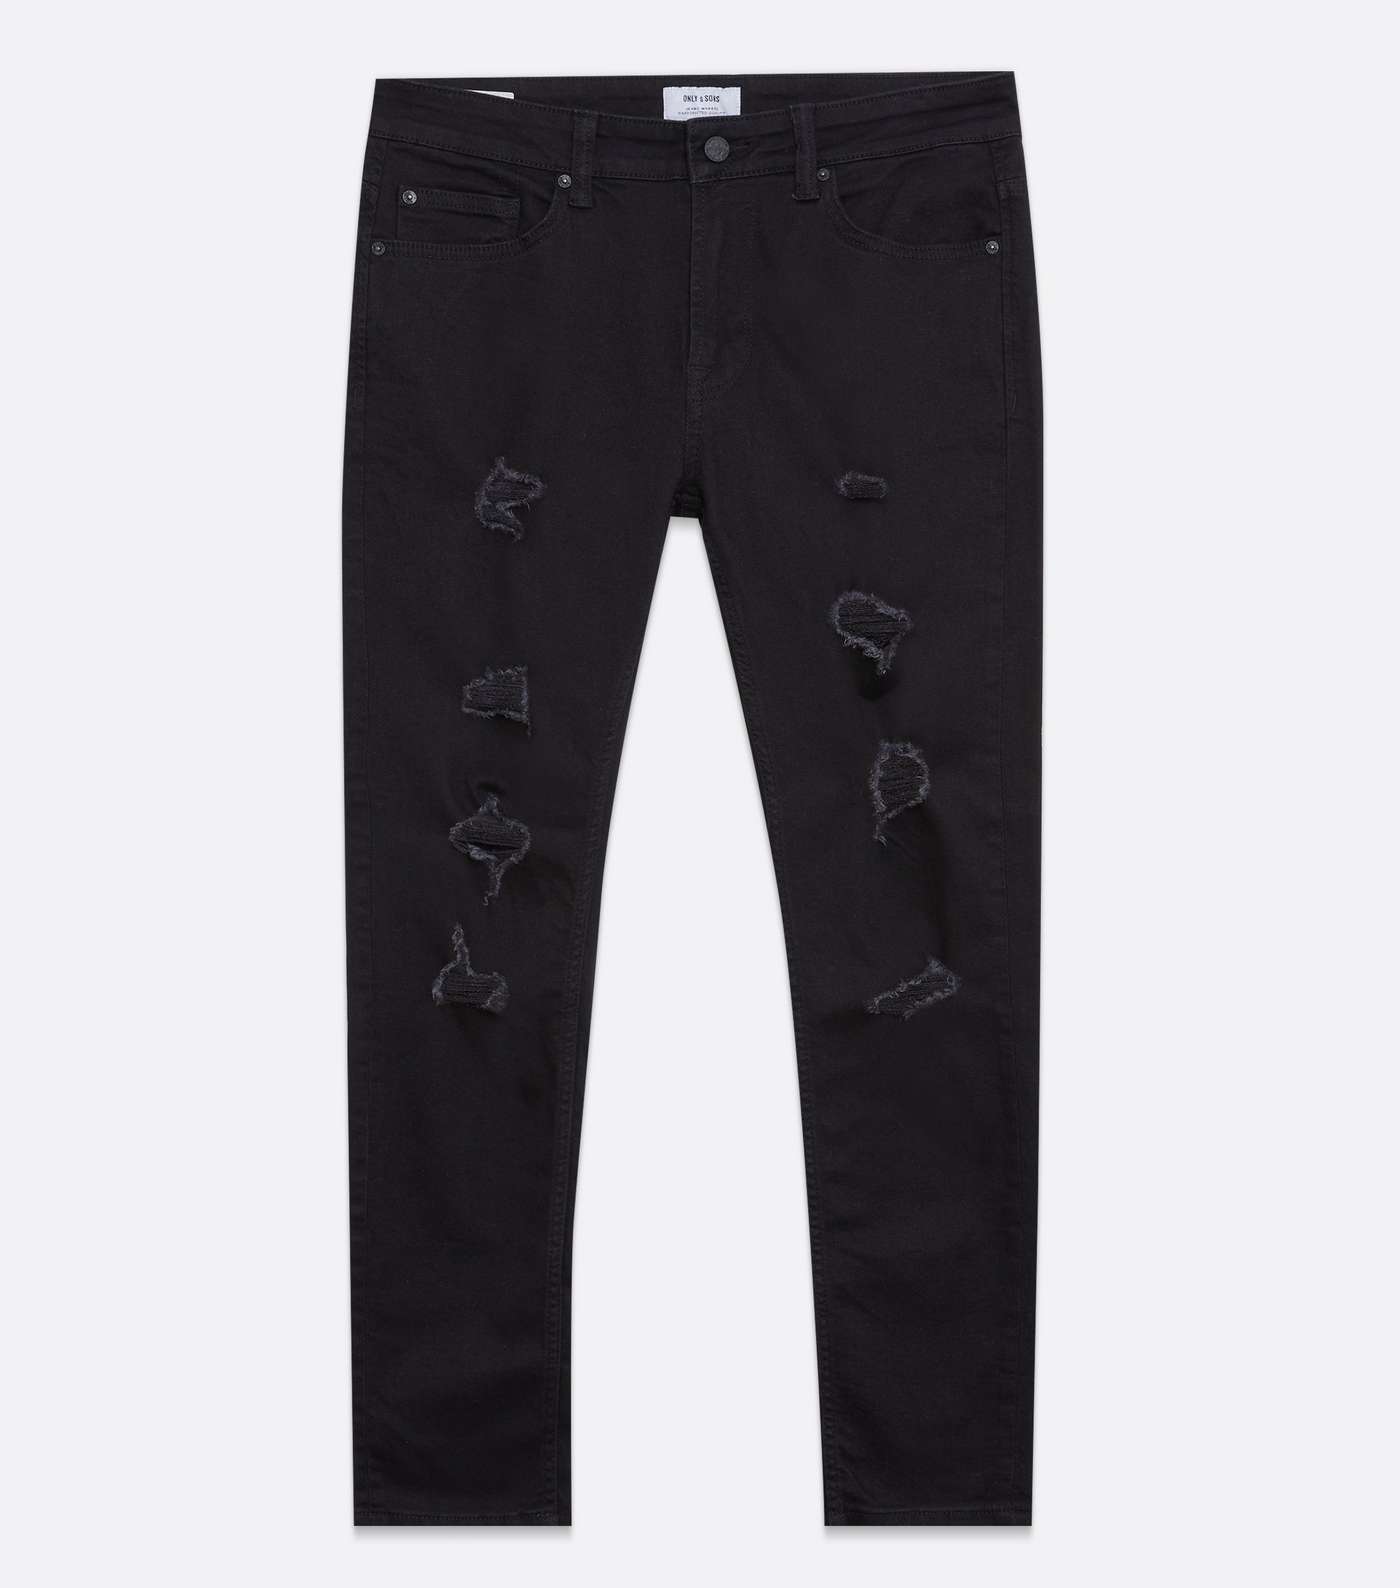 Only & Sons Black Ripped Slim Leg Jeans Image 5